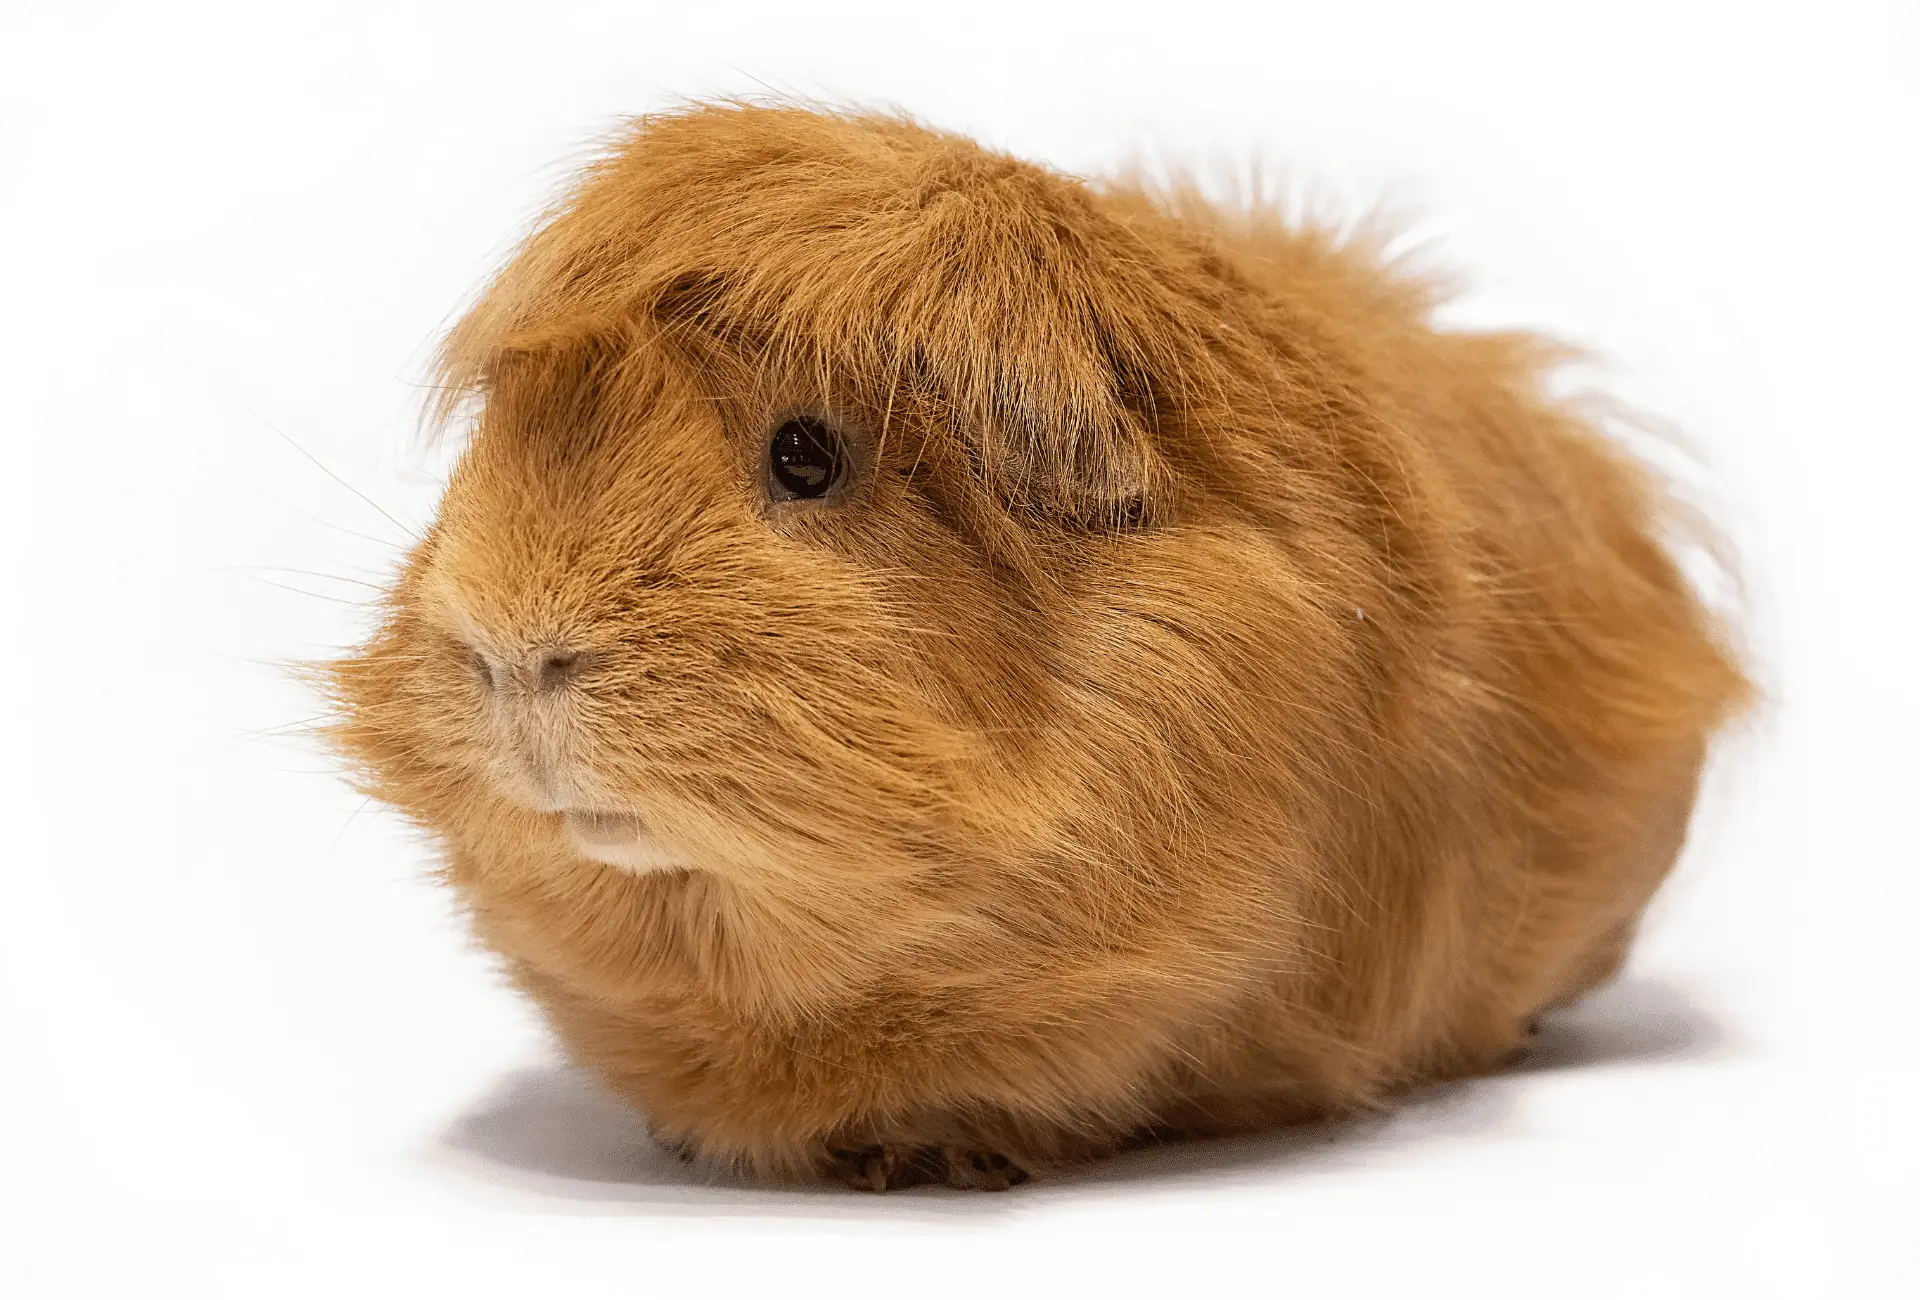 Guinea pig with unkempt fur on white background.